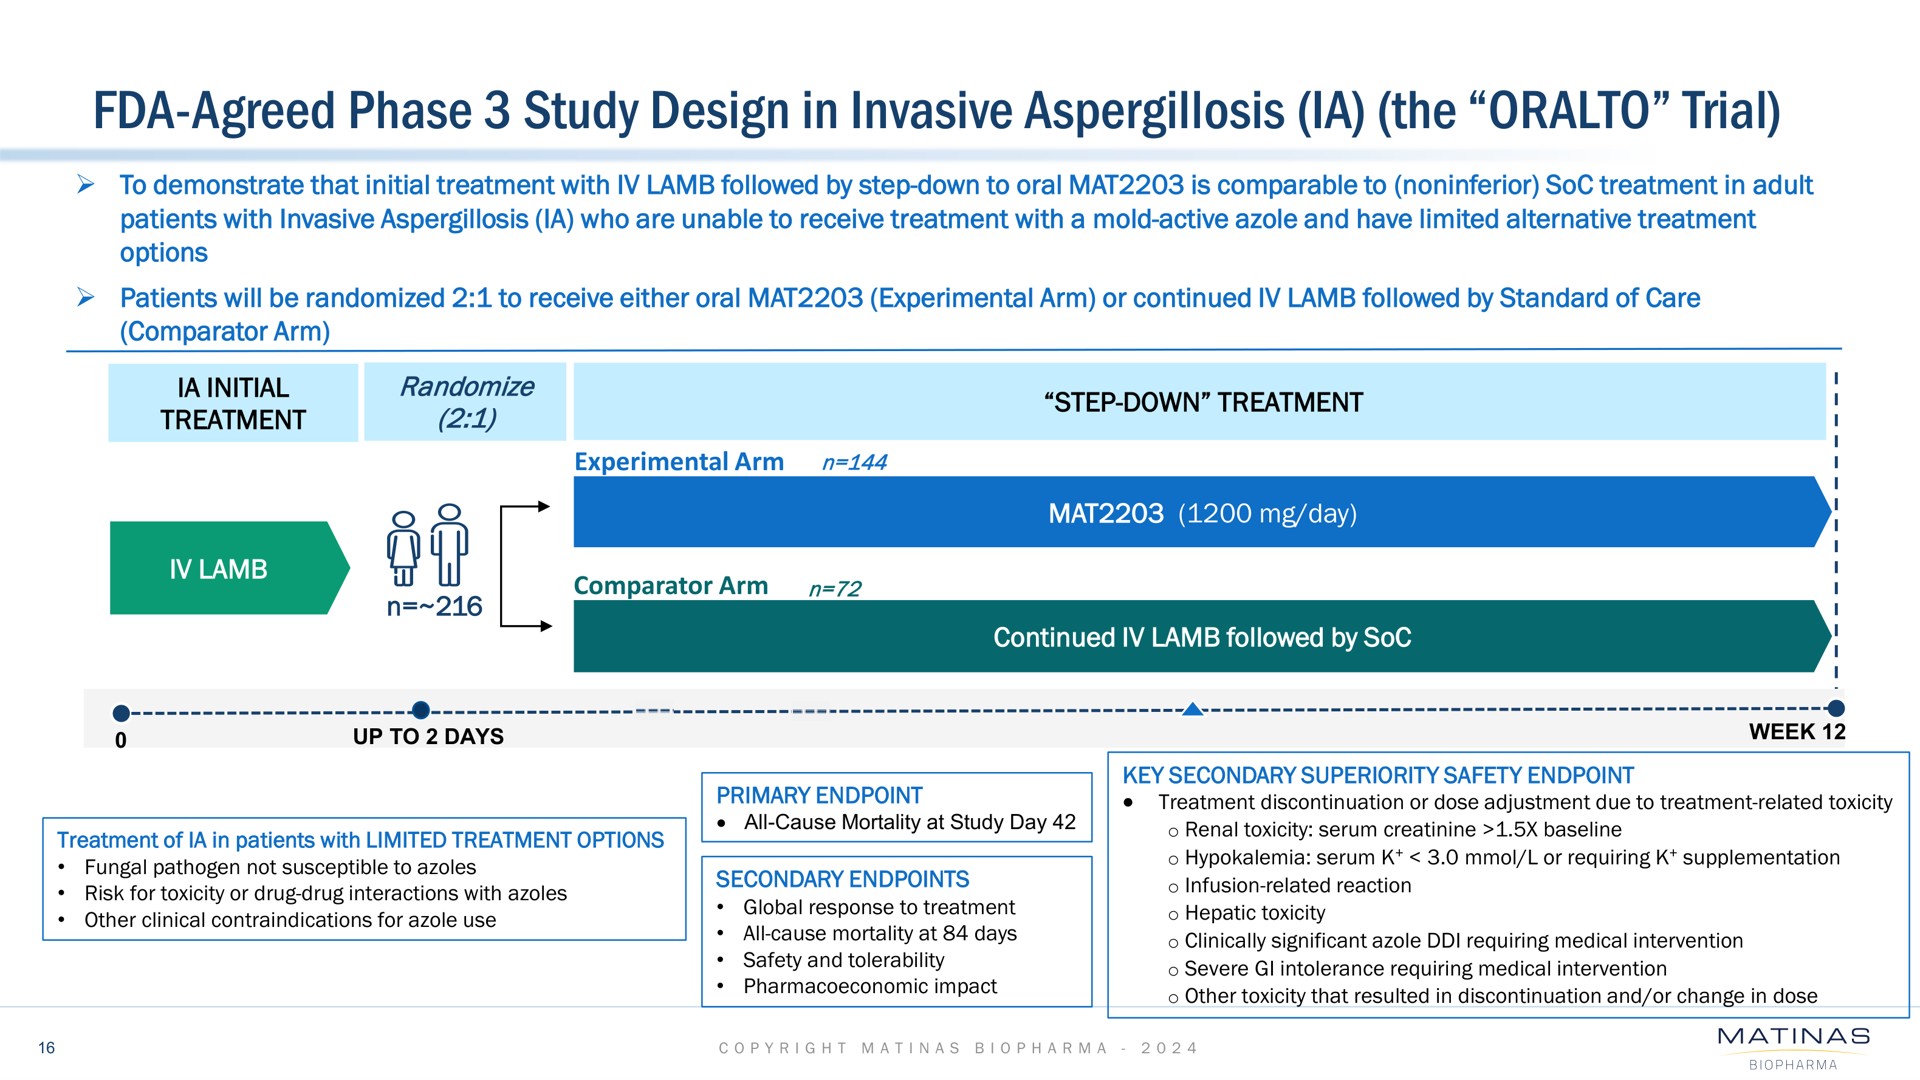 agreed phase study design in invasive aspergillosis the trial | Matinas BioPharma